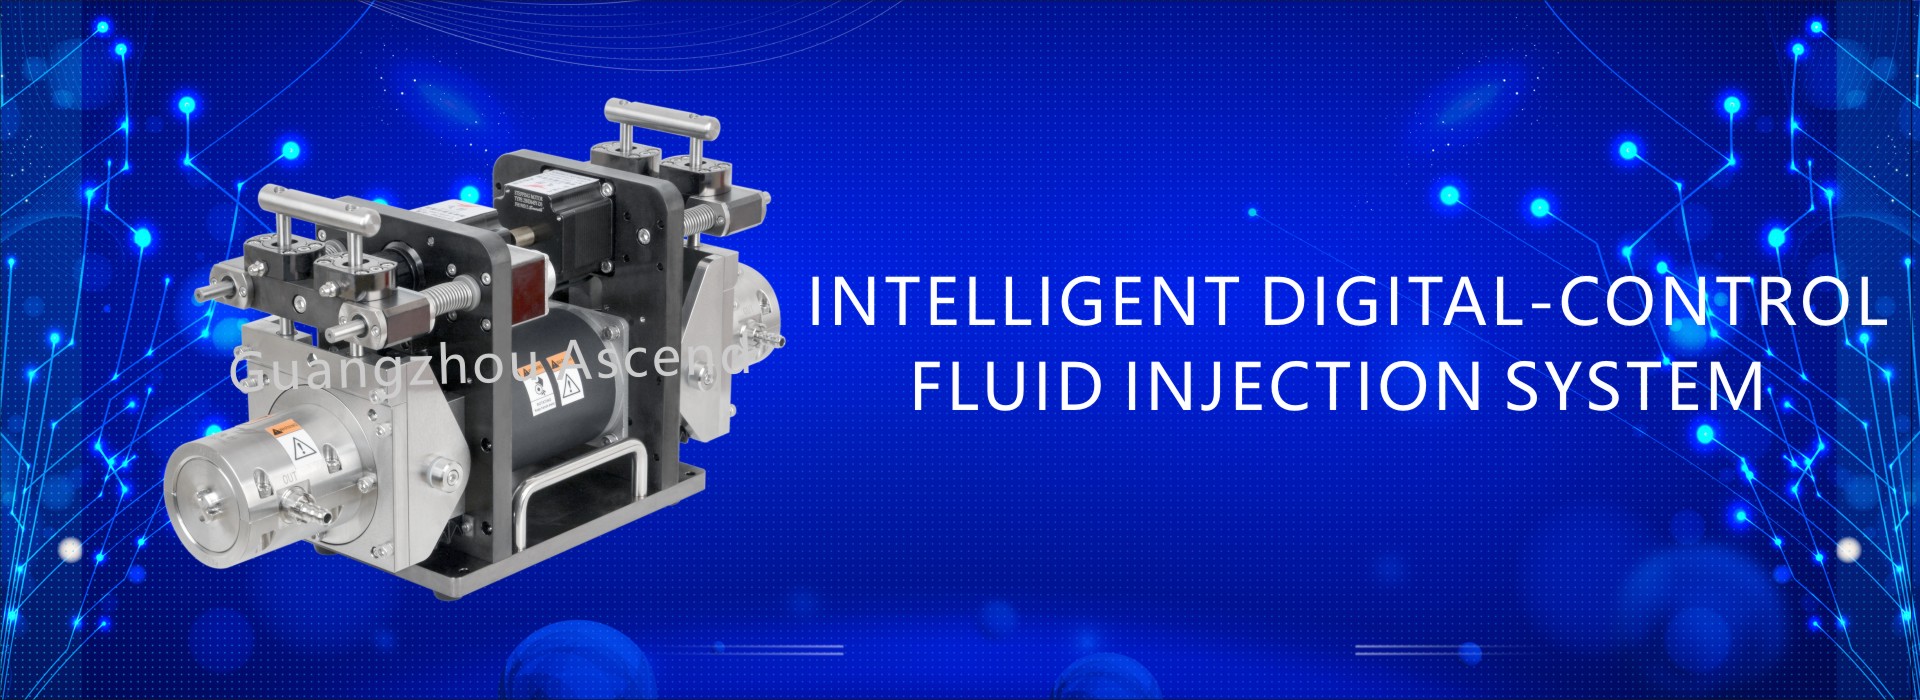 intelligent digtal-control fluid injection system